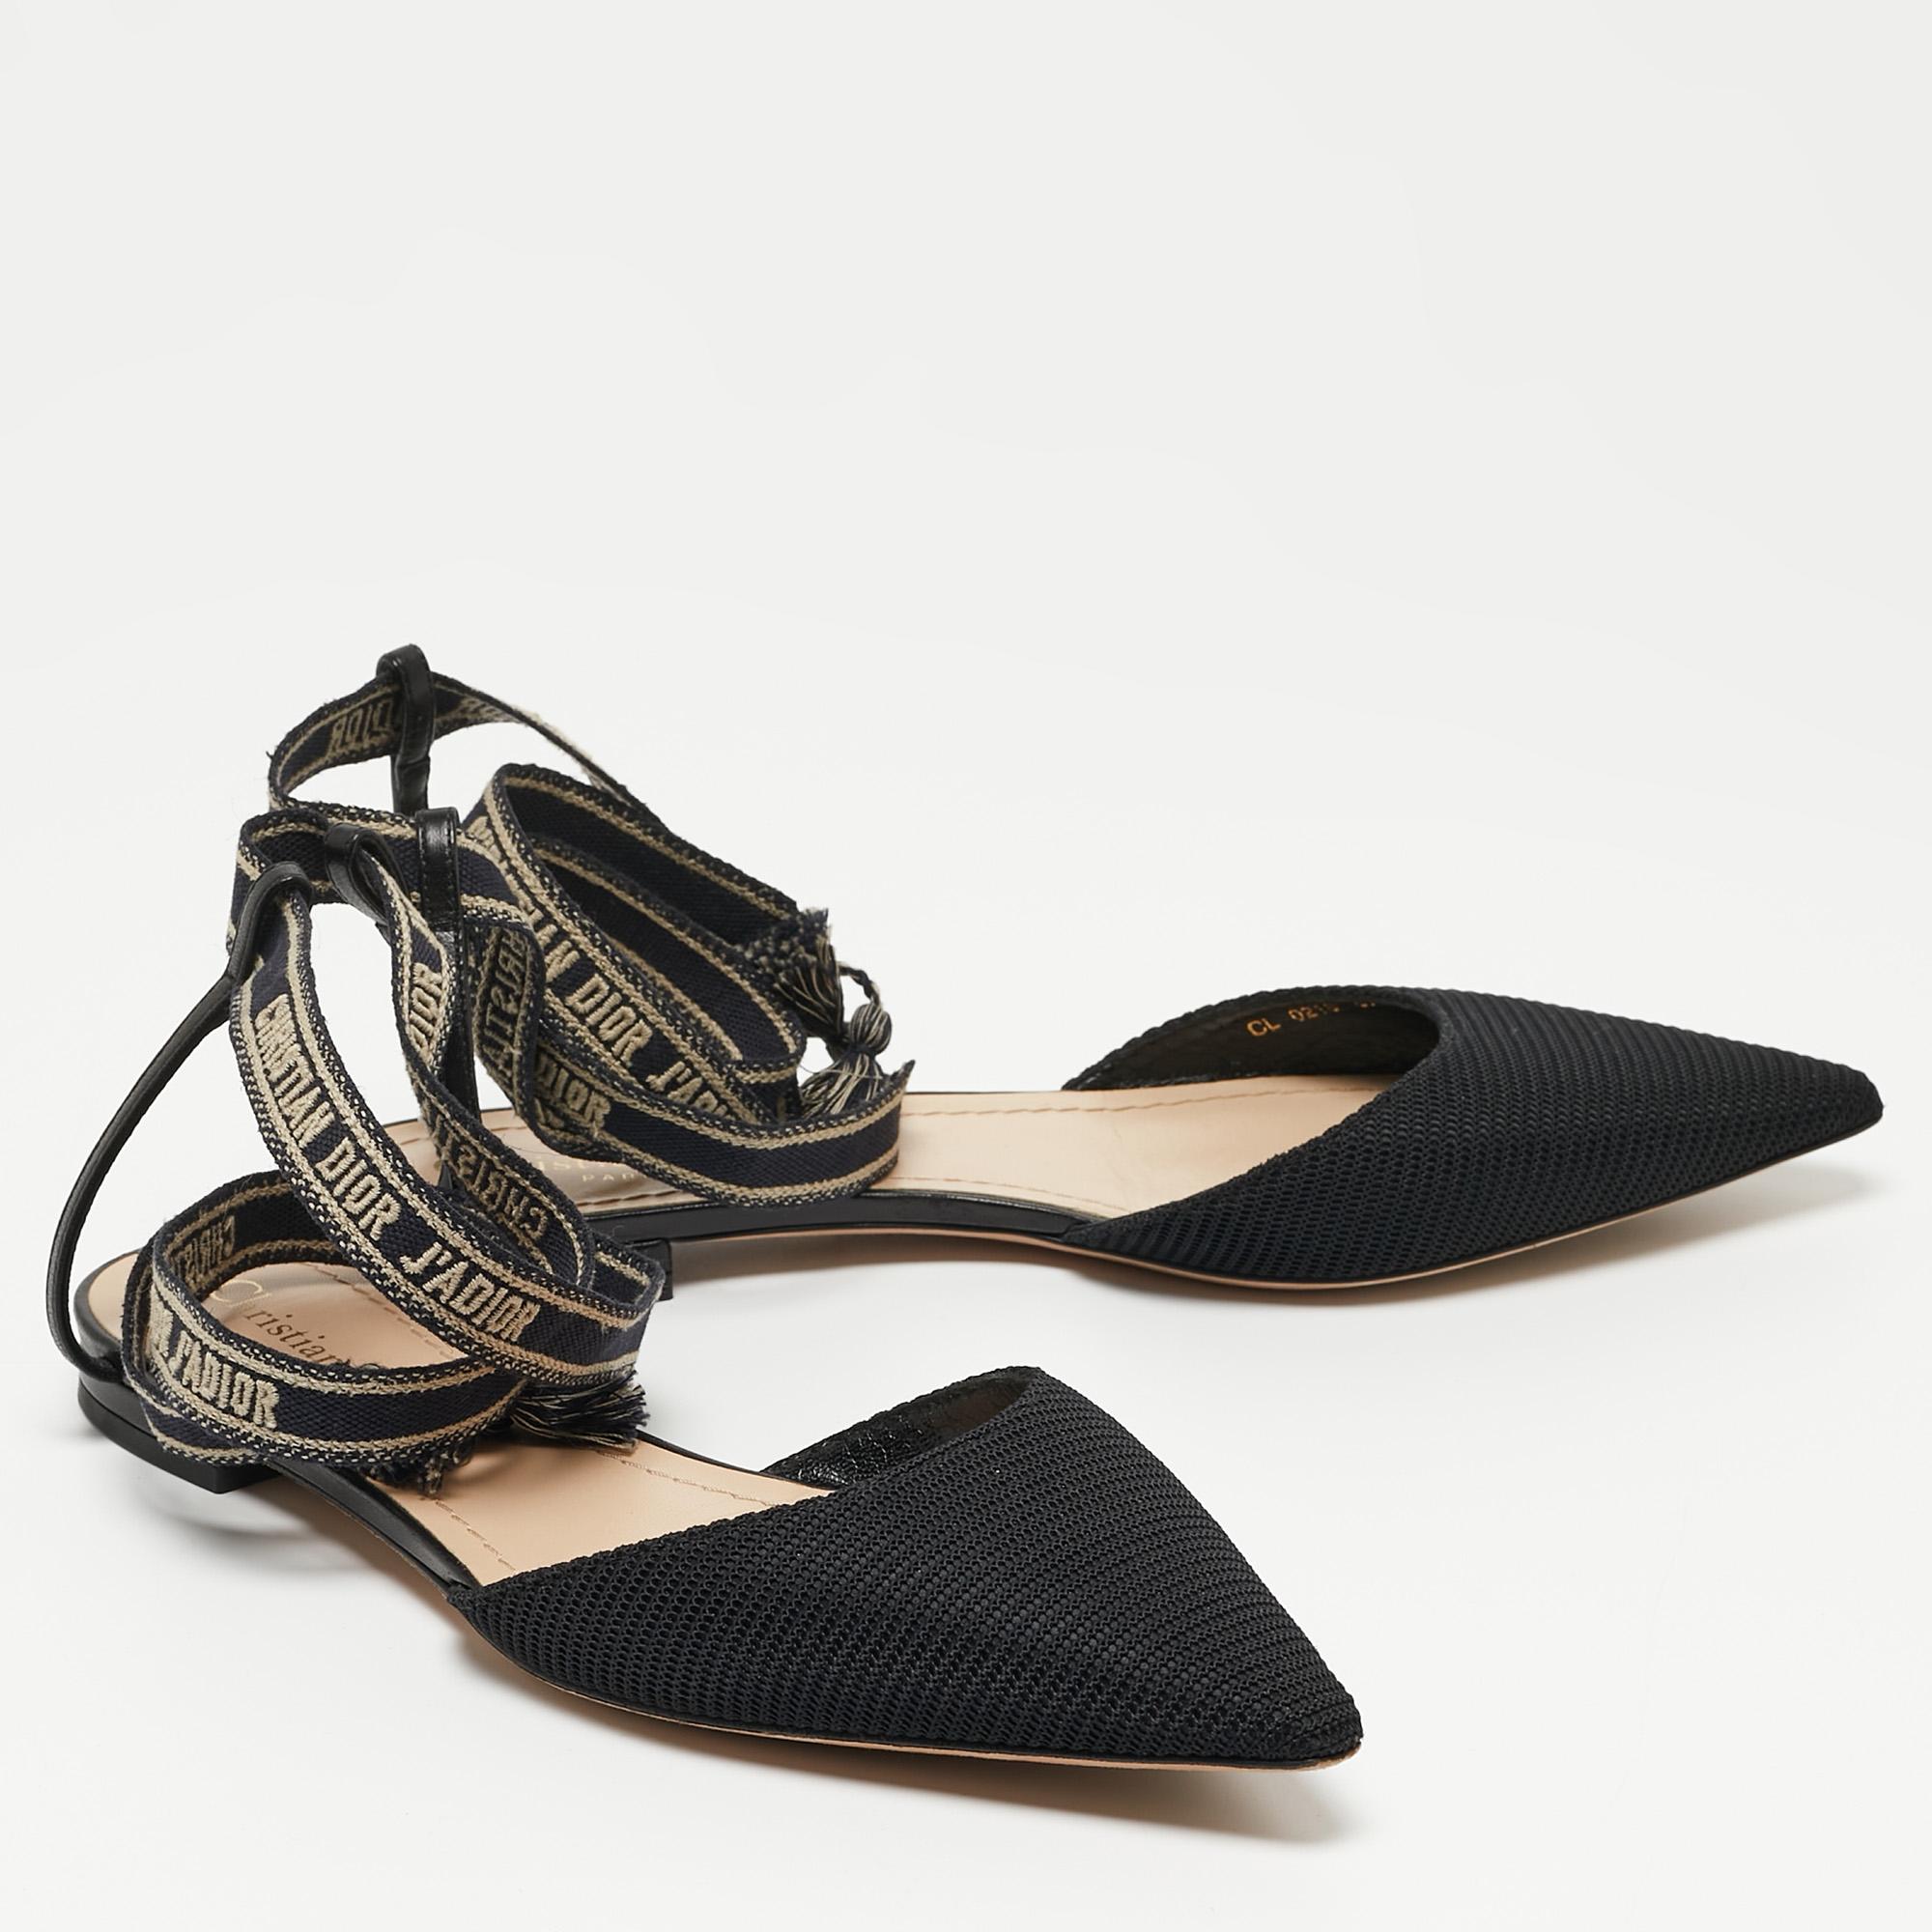 The J'adior collection from the House of Dior is one of the most beloved and celebrated creations of the label. These J'adior flats are made from black technical fabric and are adorned with logo-printed ankle wrap feature. Sleek and feminine, let